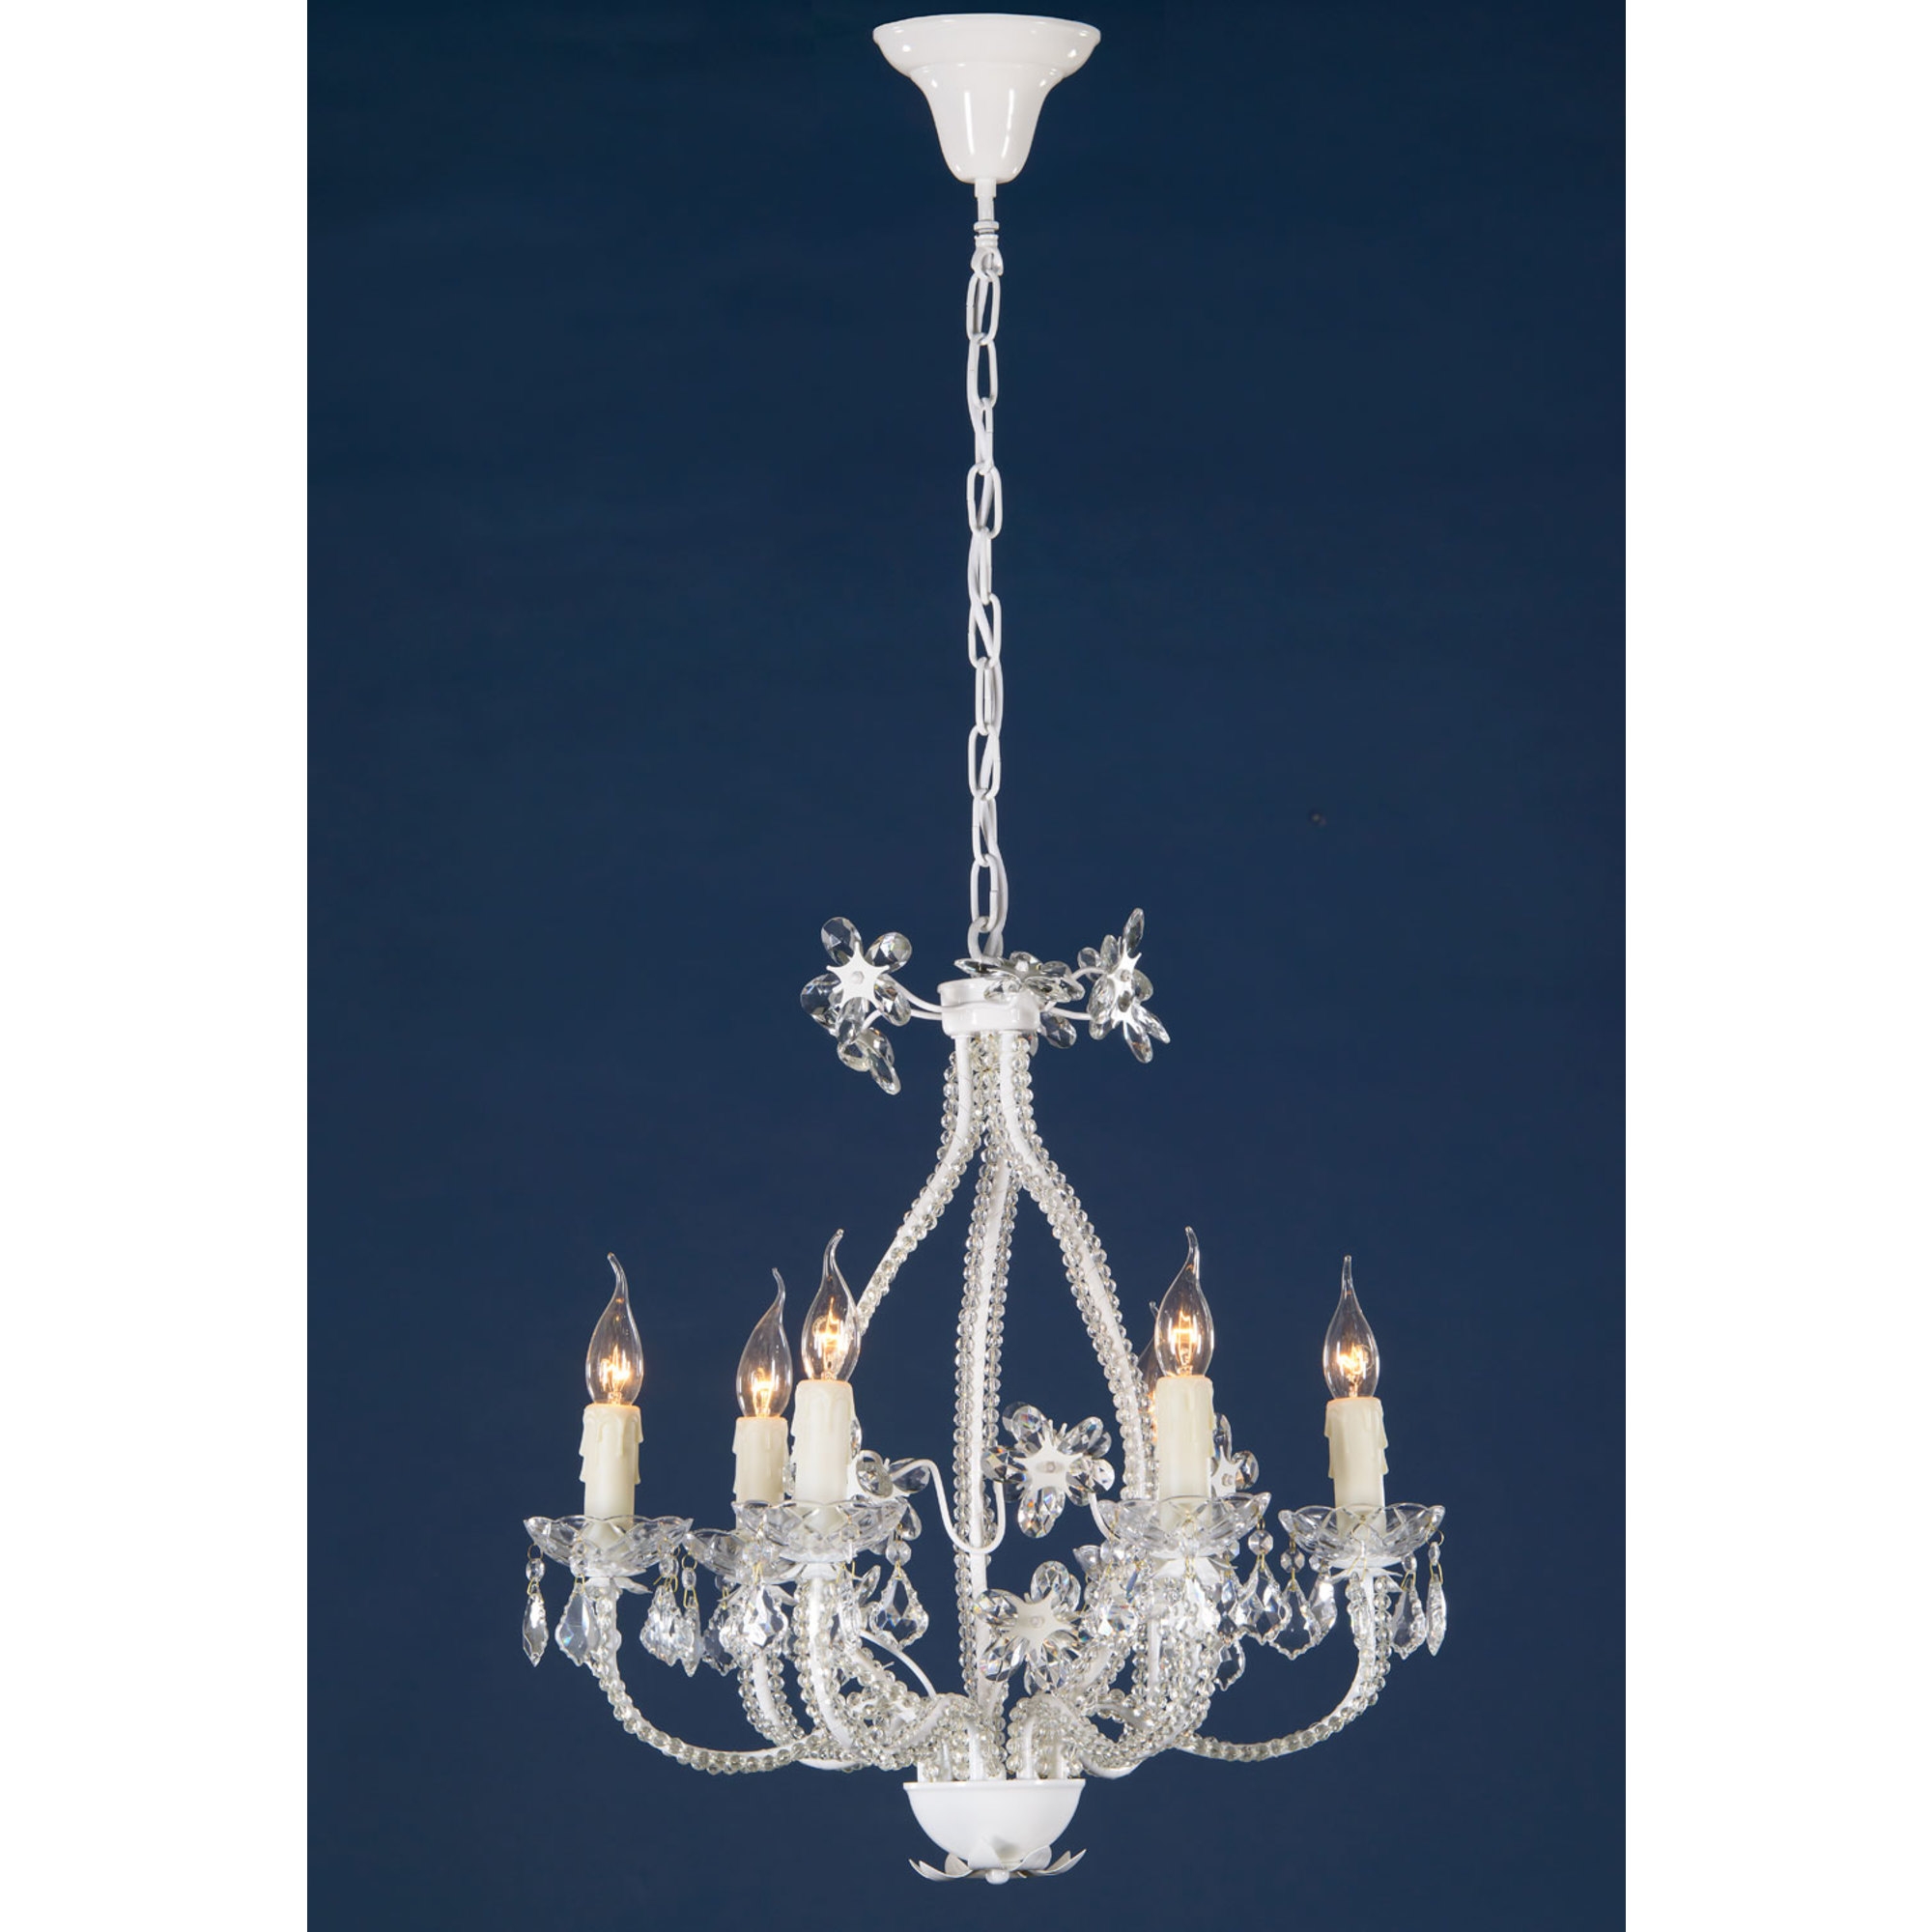 6 Light Chandelier - White Enamel and Clear